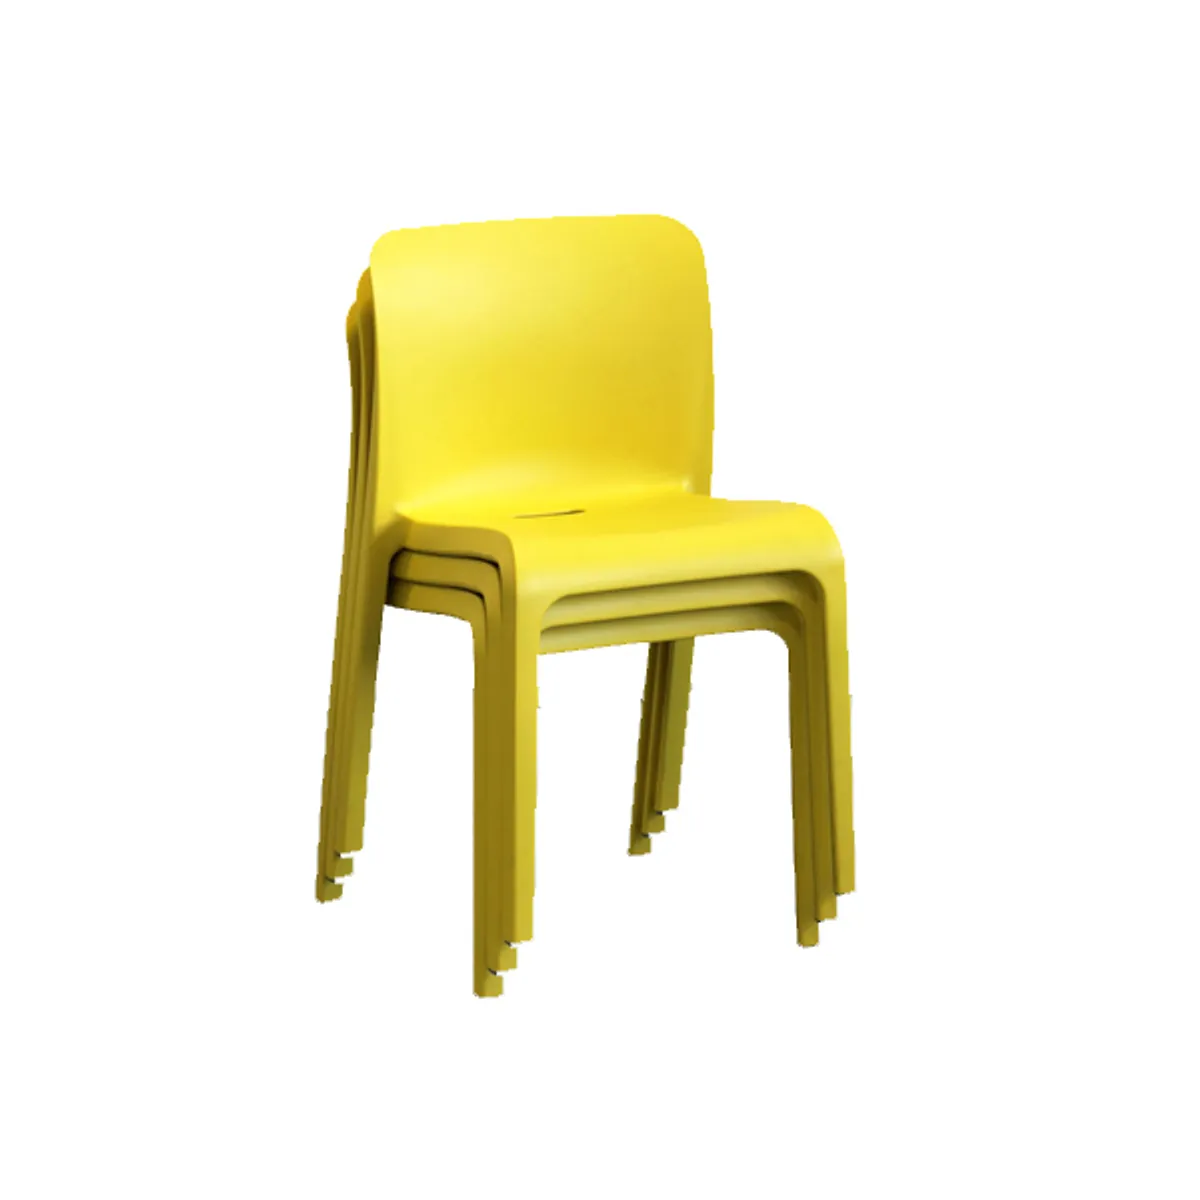 Pollysidechair Inside Out Contracts2 copy